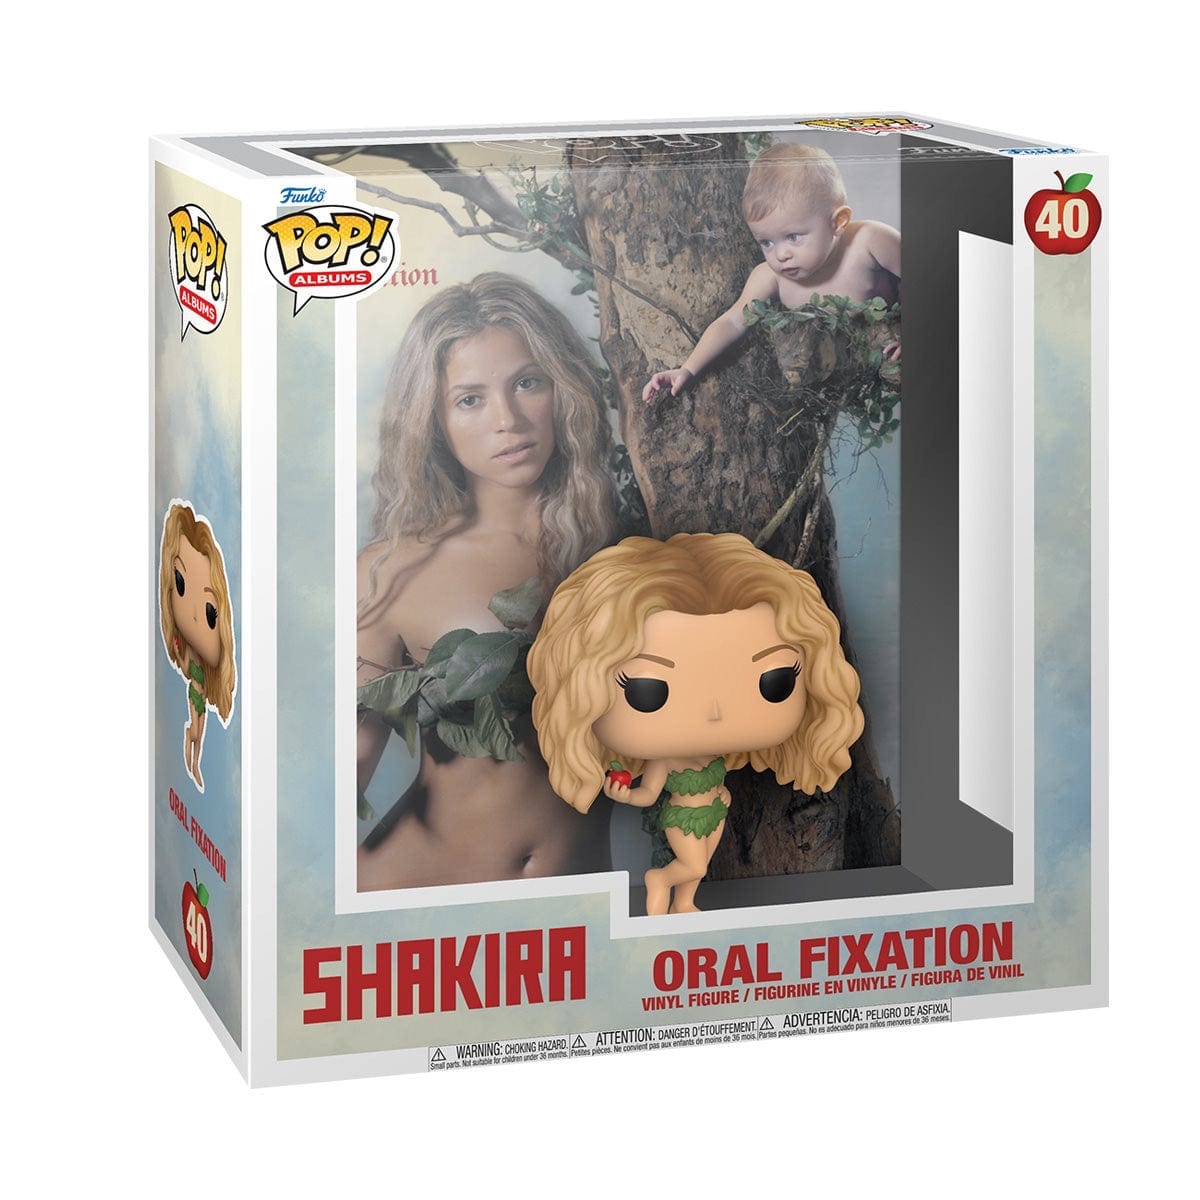 Shakira Oral Fixation Pop! Album Figure #40 with Case-In-Display-window-box